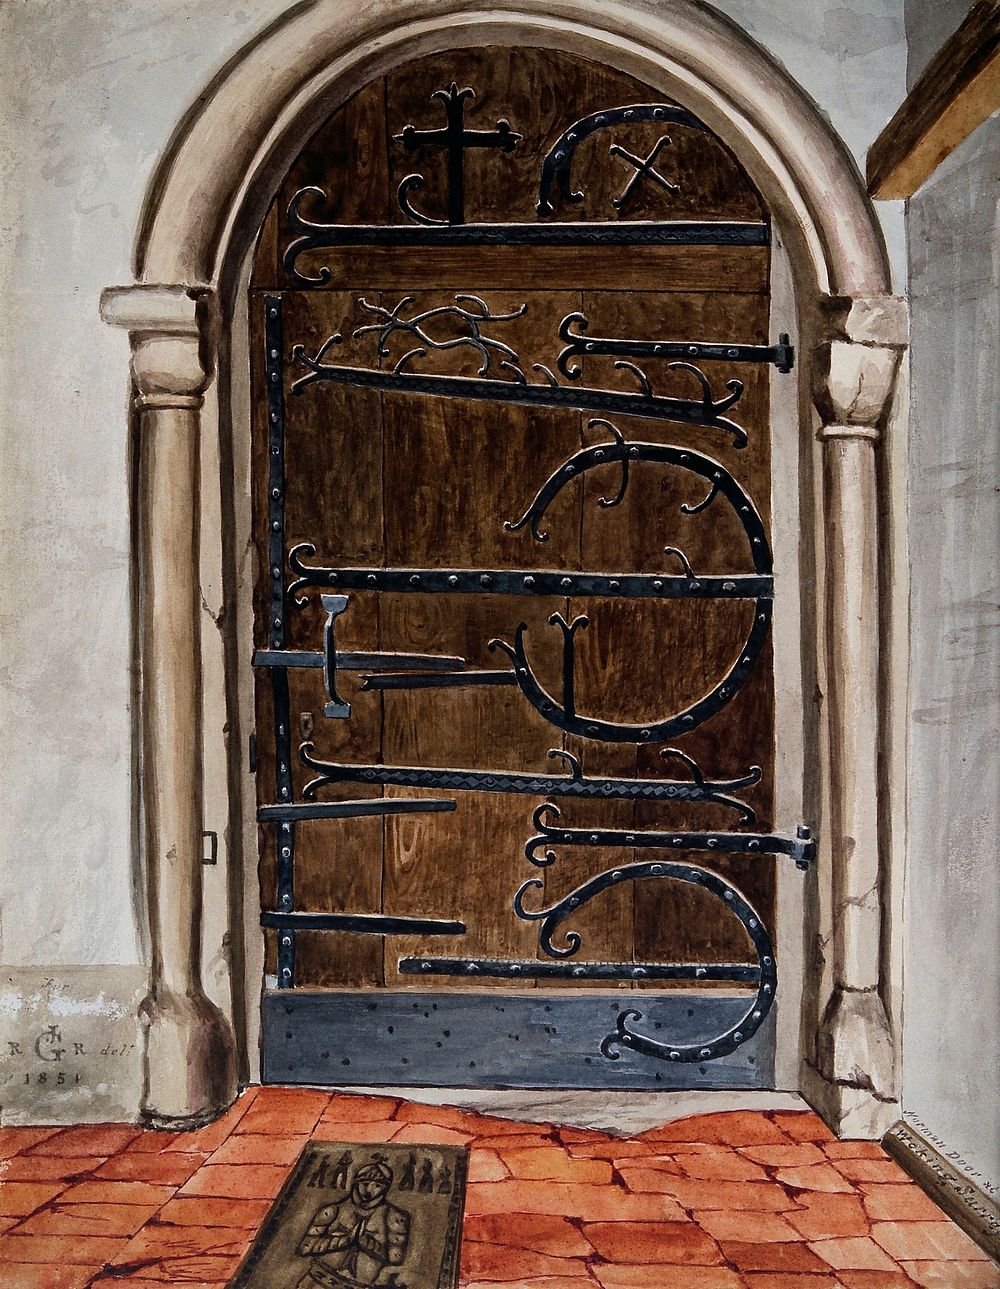 Architecture: a church doorway with wrought ironwork at Woking, Surrey. Watercolour painting by [R J G R], 1851.